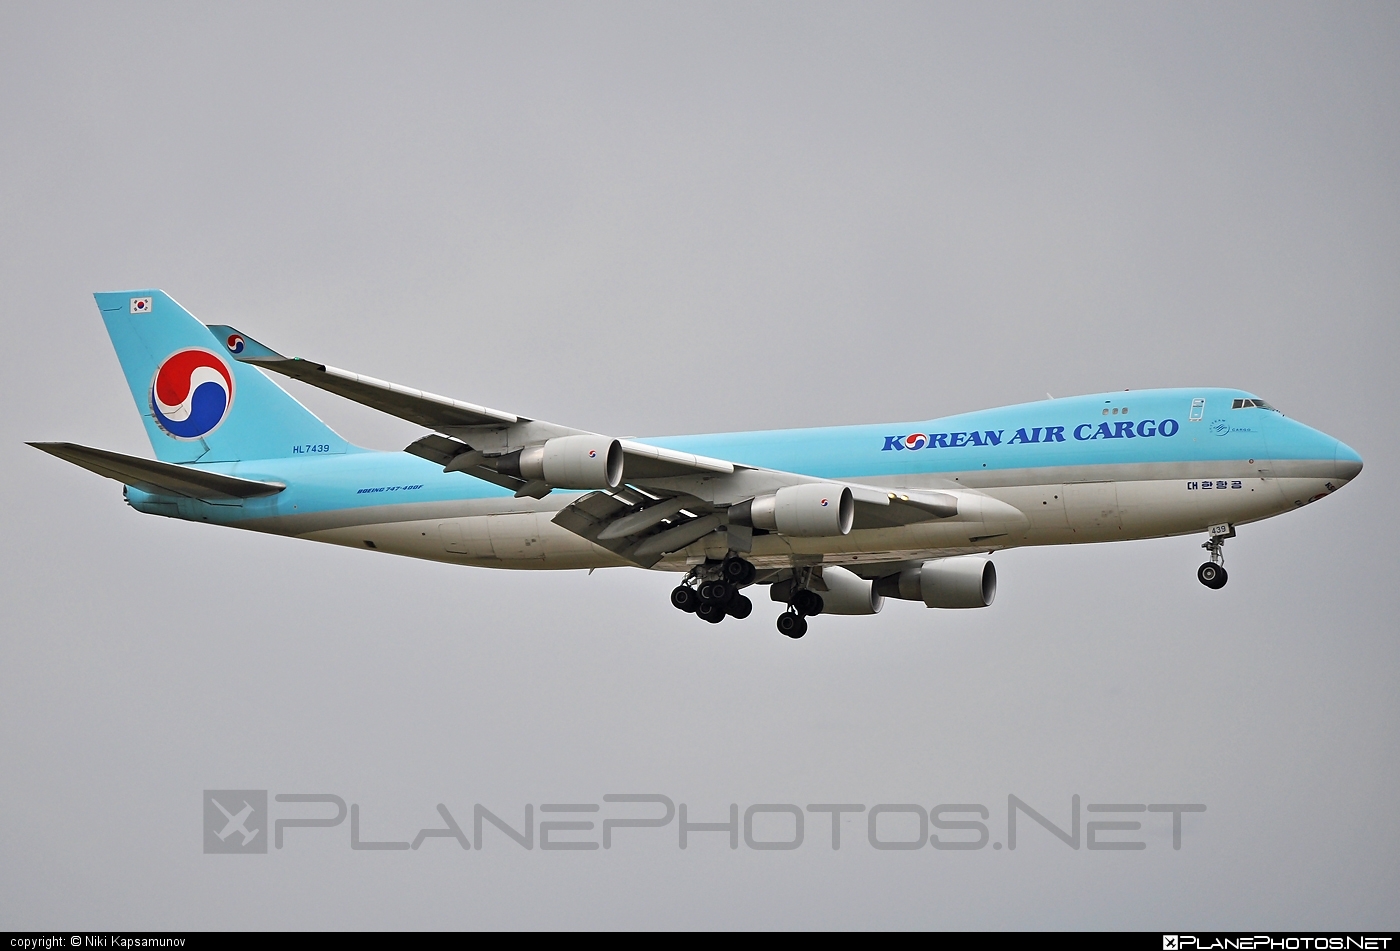 Boeing 747-400F - HL7439 operated by Korean Air Cargo #b747 #boeing #boeing747 #jumbo #koreanair #koreanaircargo